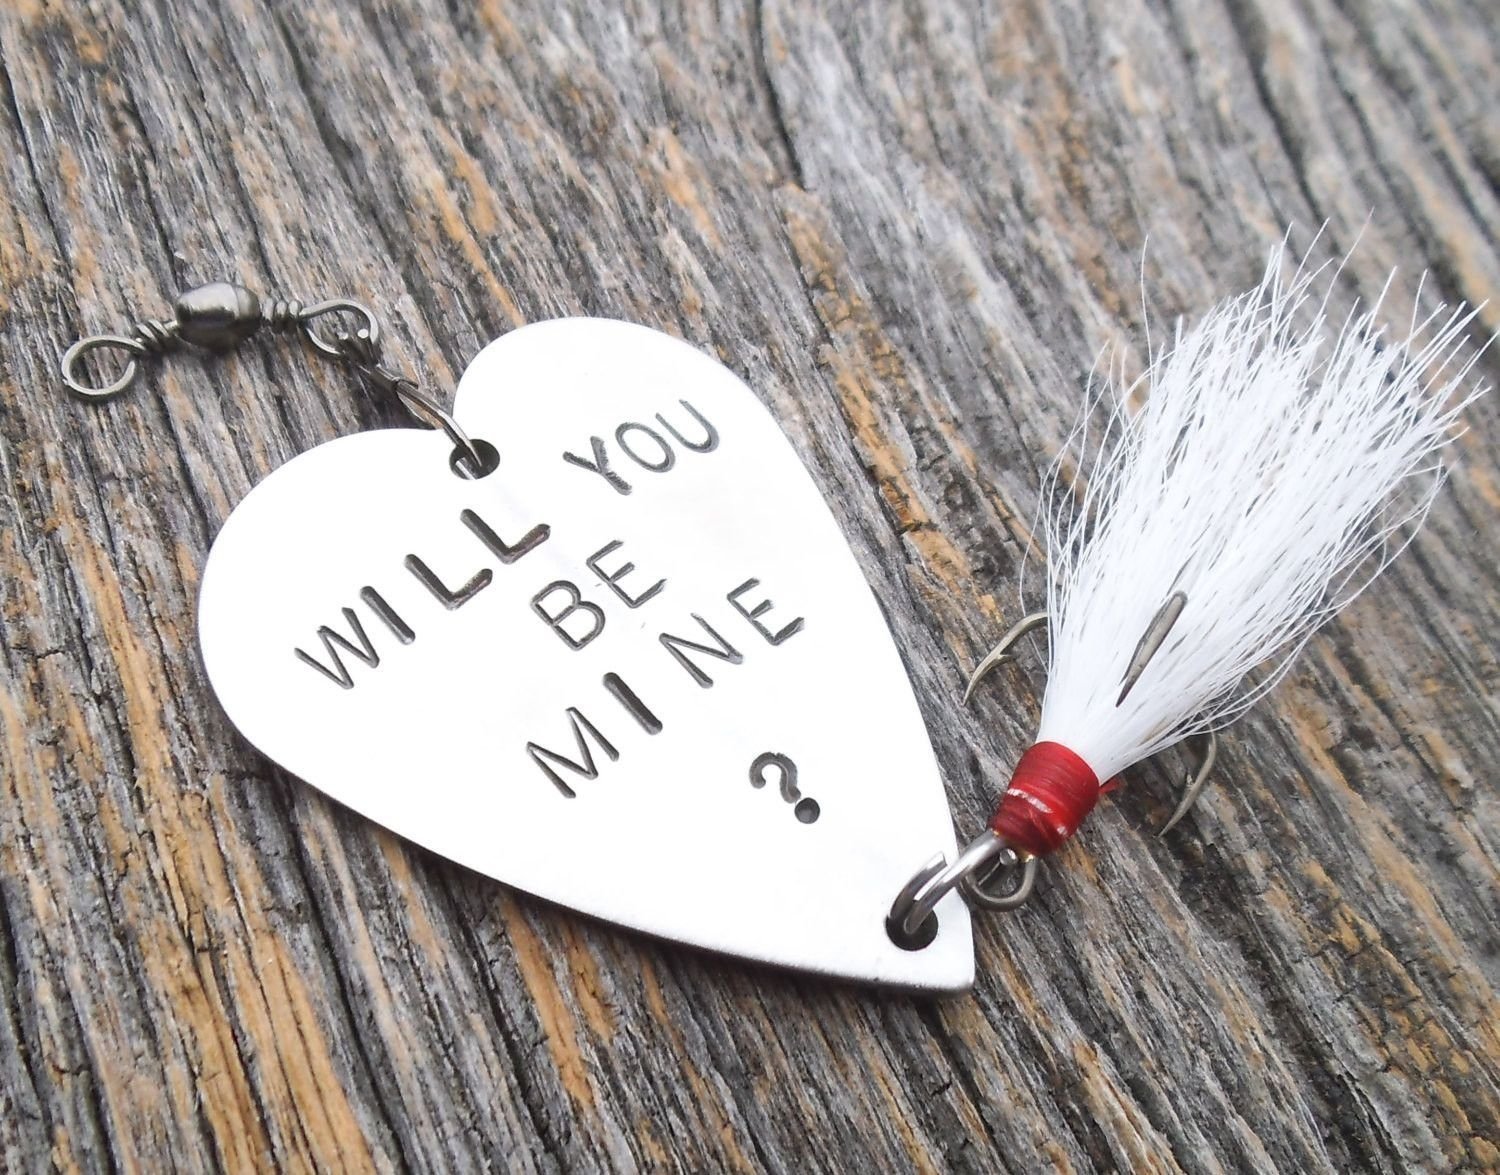 10 Stylish Marriage Proposal Ideas For Men will you be mine unique marriage proposal idea fishing lure men 2022